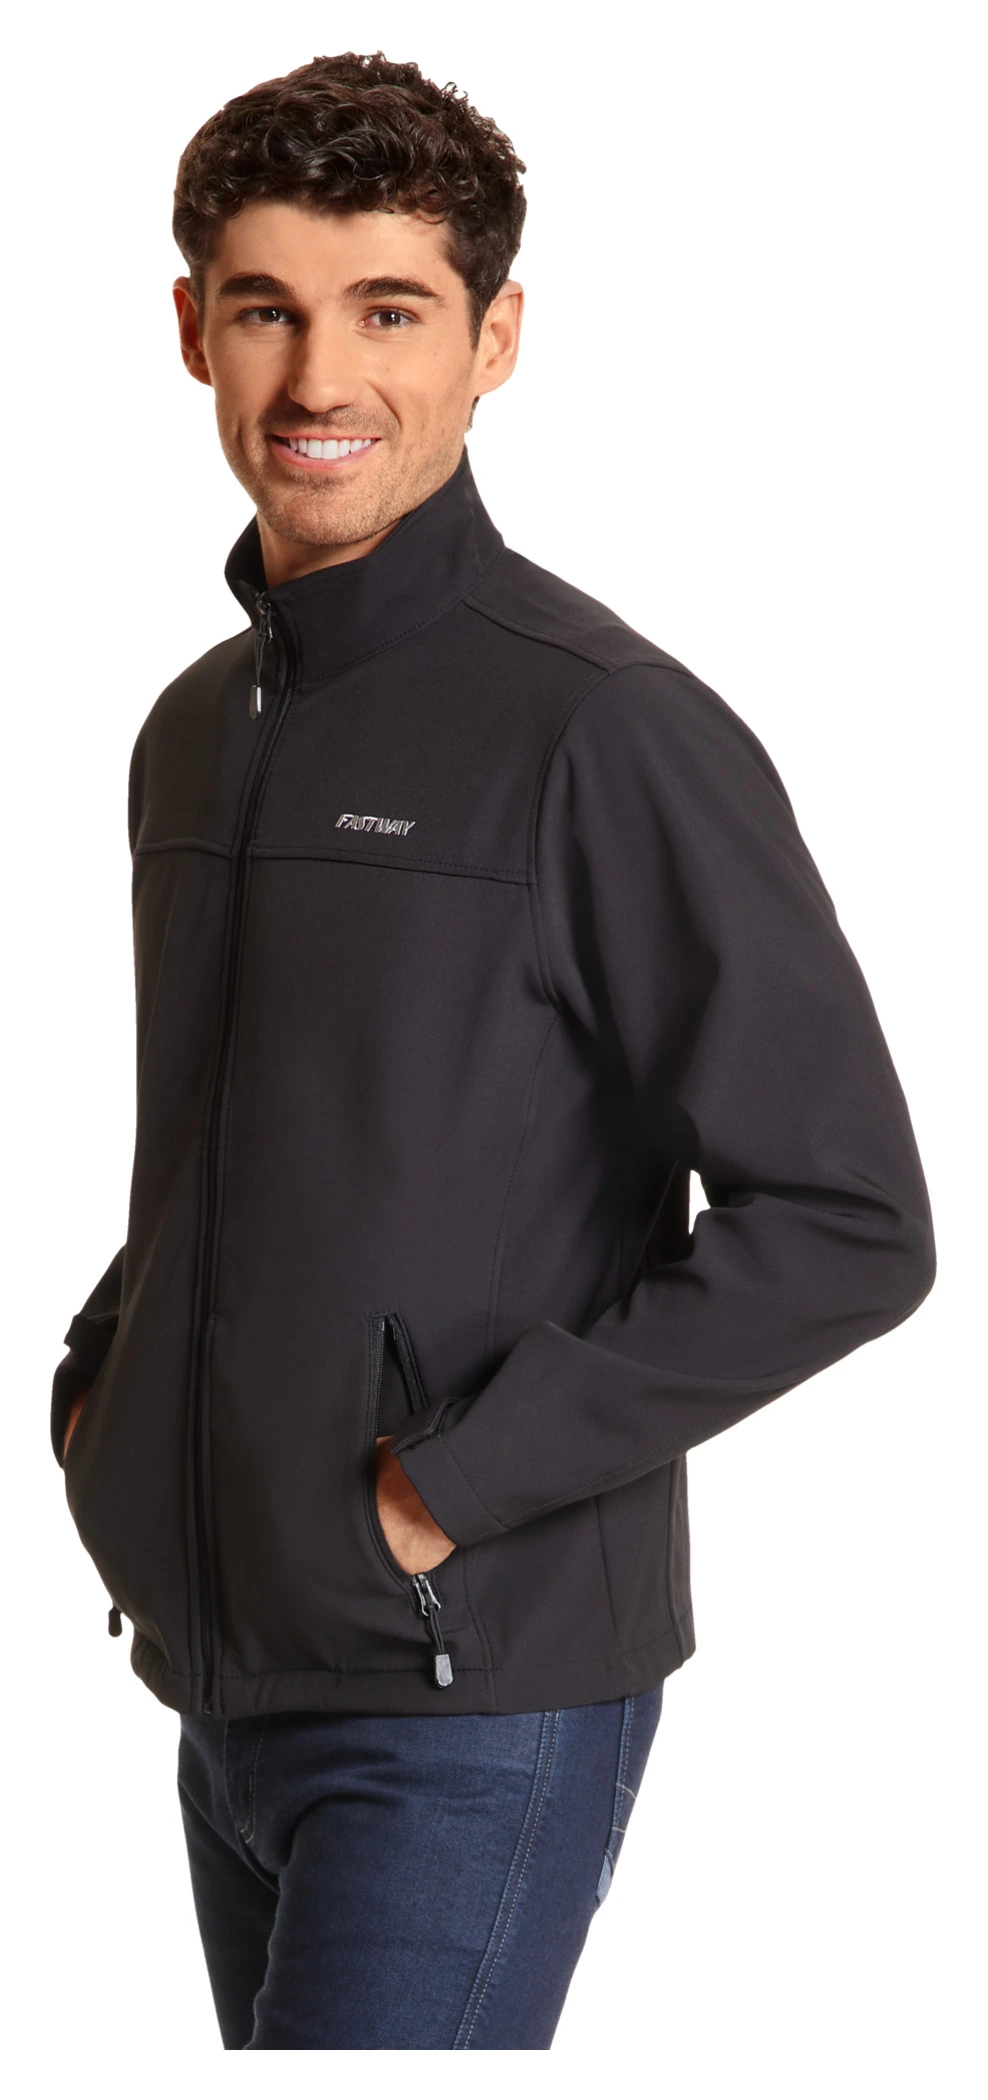 FASTWAY GIACCA SOFTSHELL